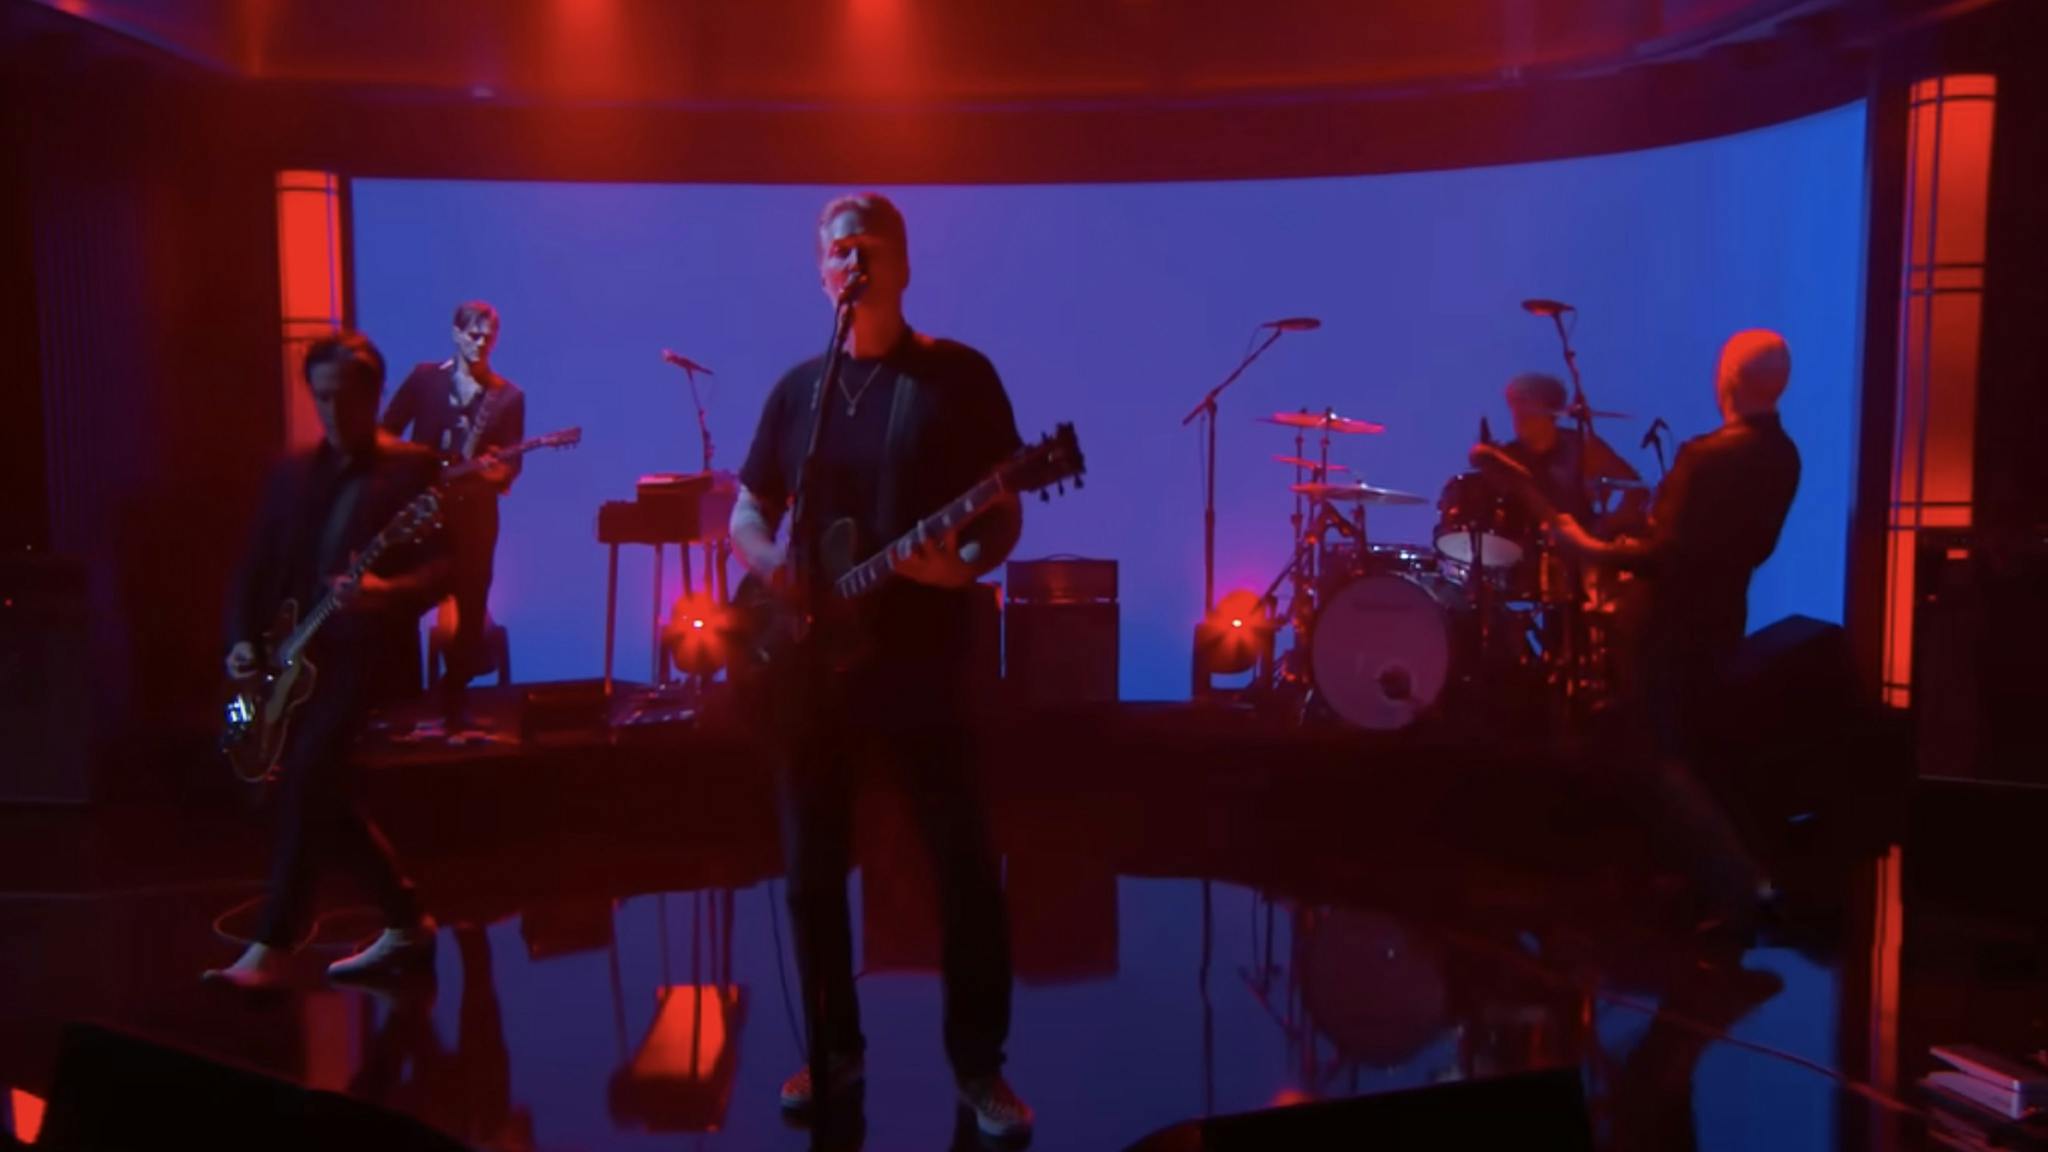 See Queens Of The Stone Age play Emotion Sickness on Jimmy Kimmel Live